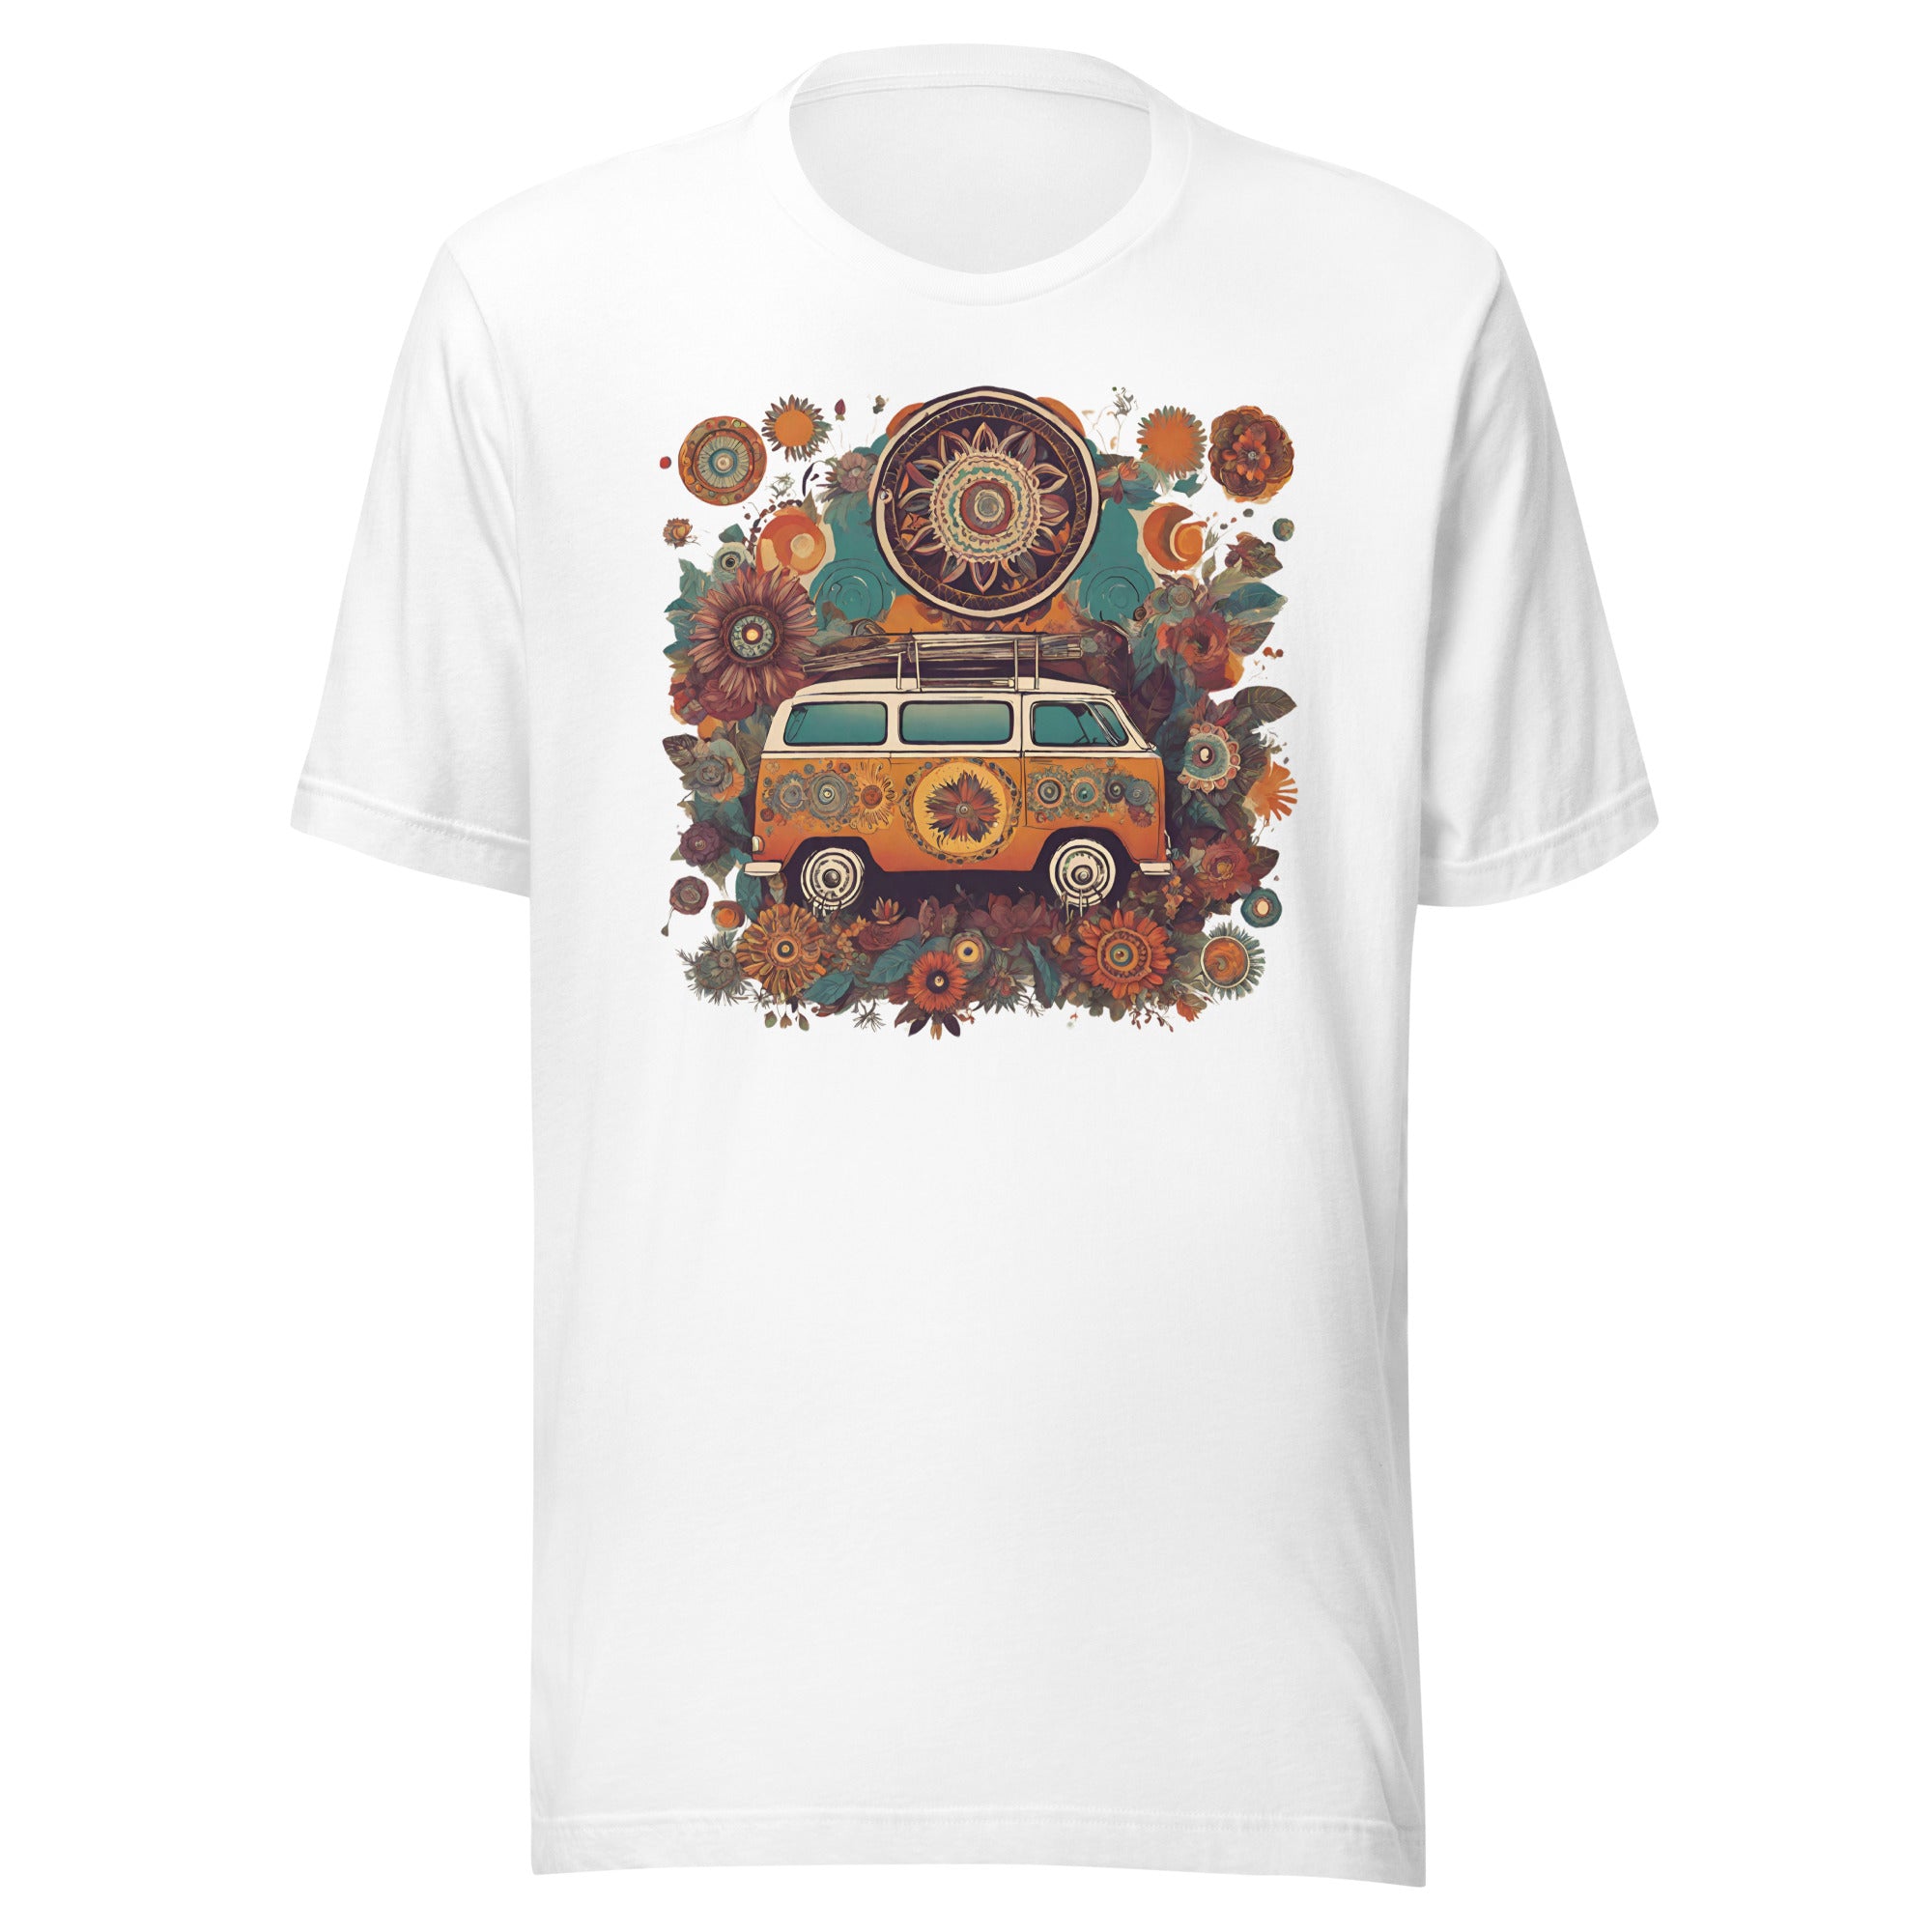 Hitch a Ride on the Magic Bus of Love - Unisex T-Shirt